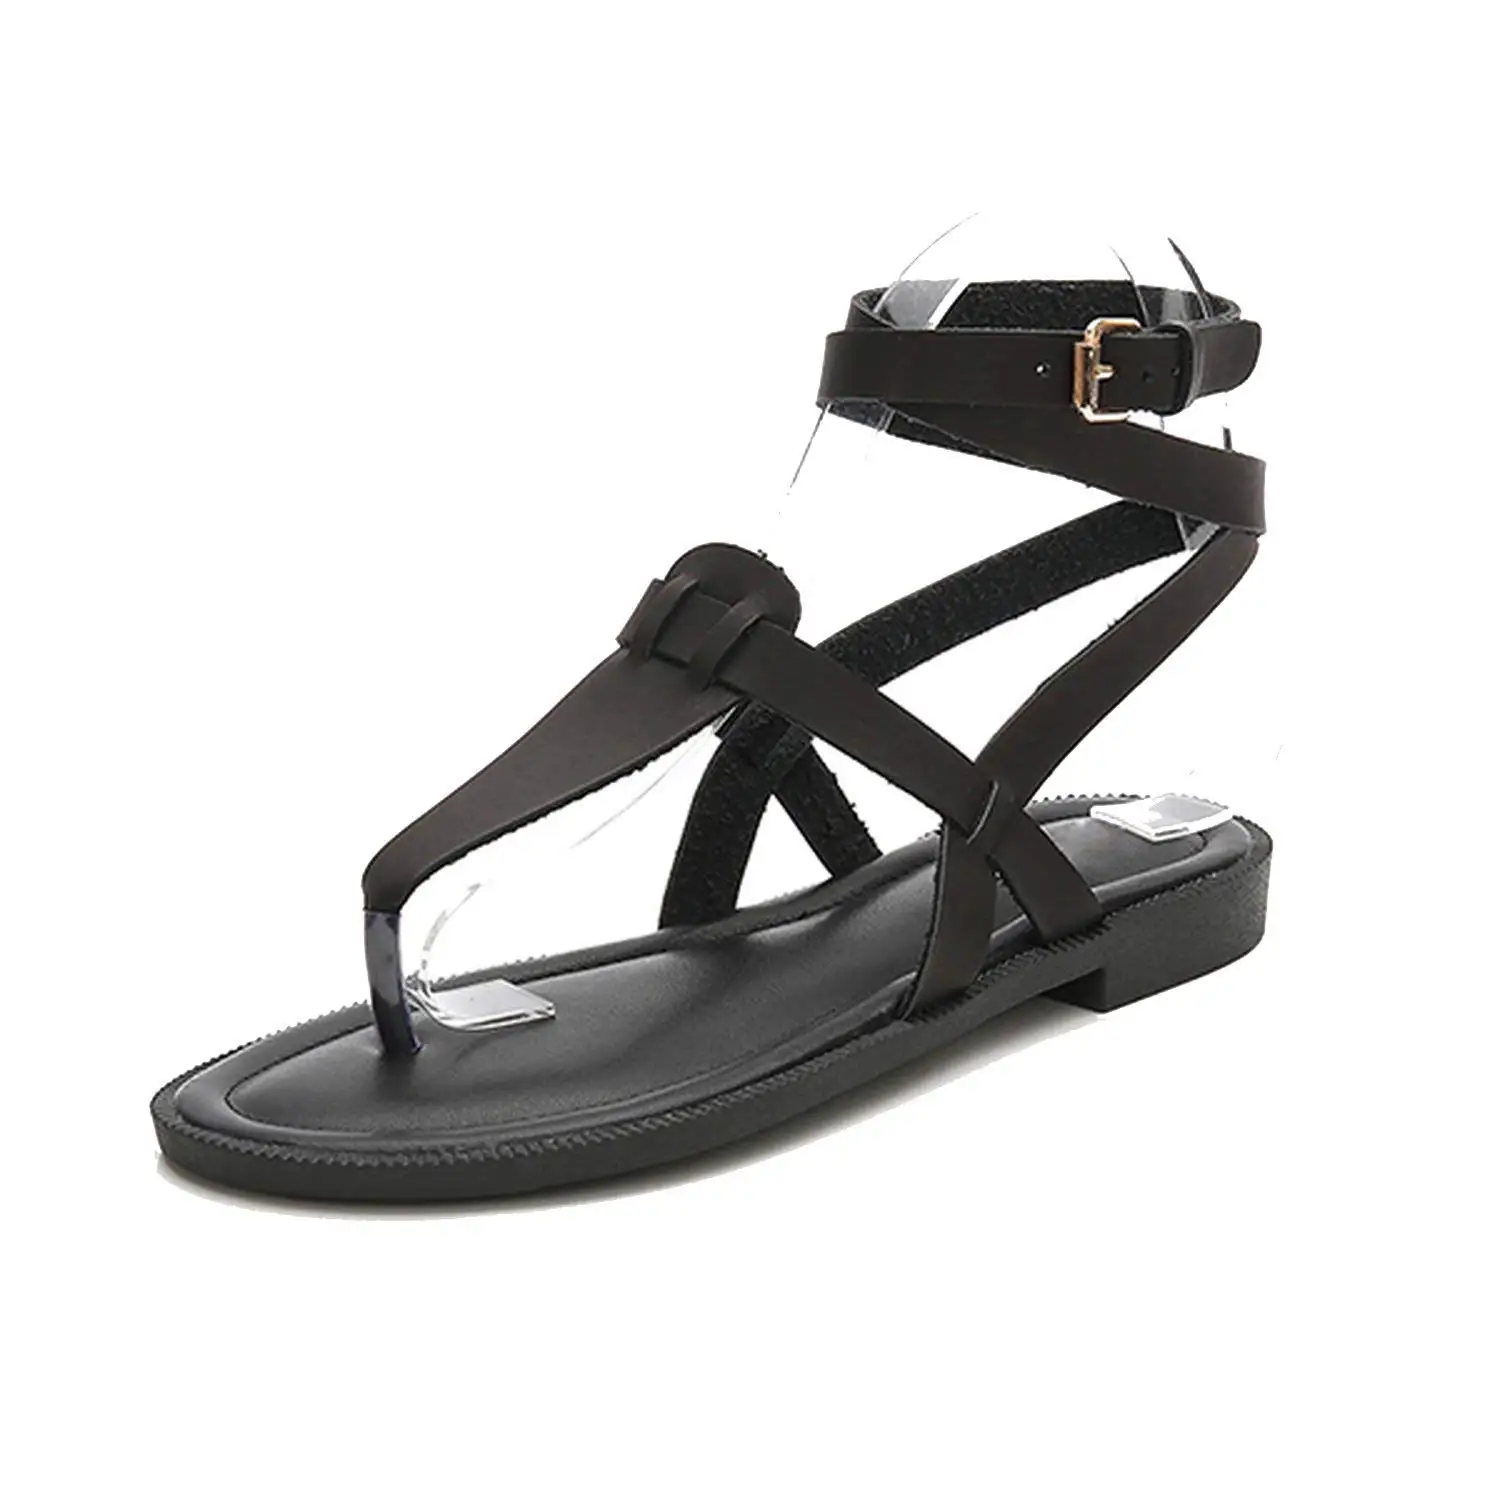 Cheap Ankle Strap Sandals Flat, find Ankle Strap Sandals Flat deals on ...